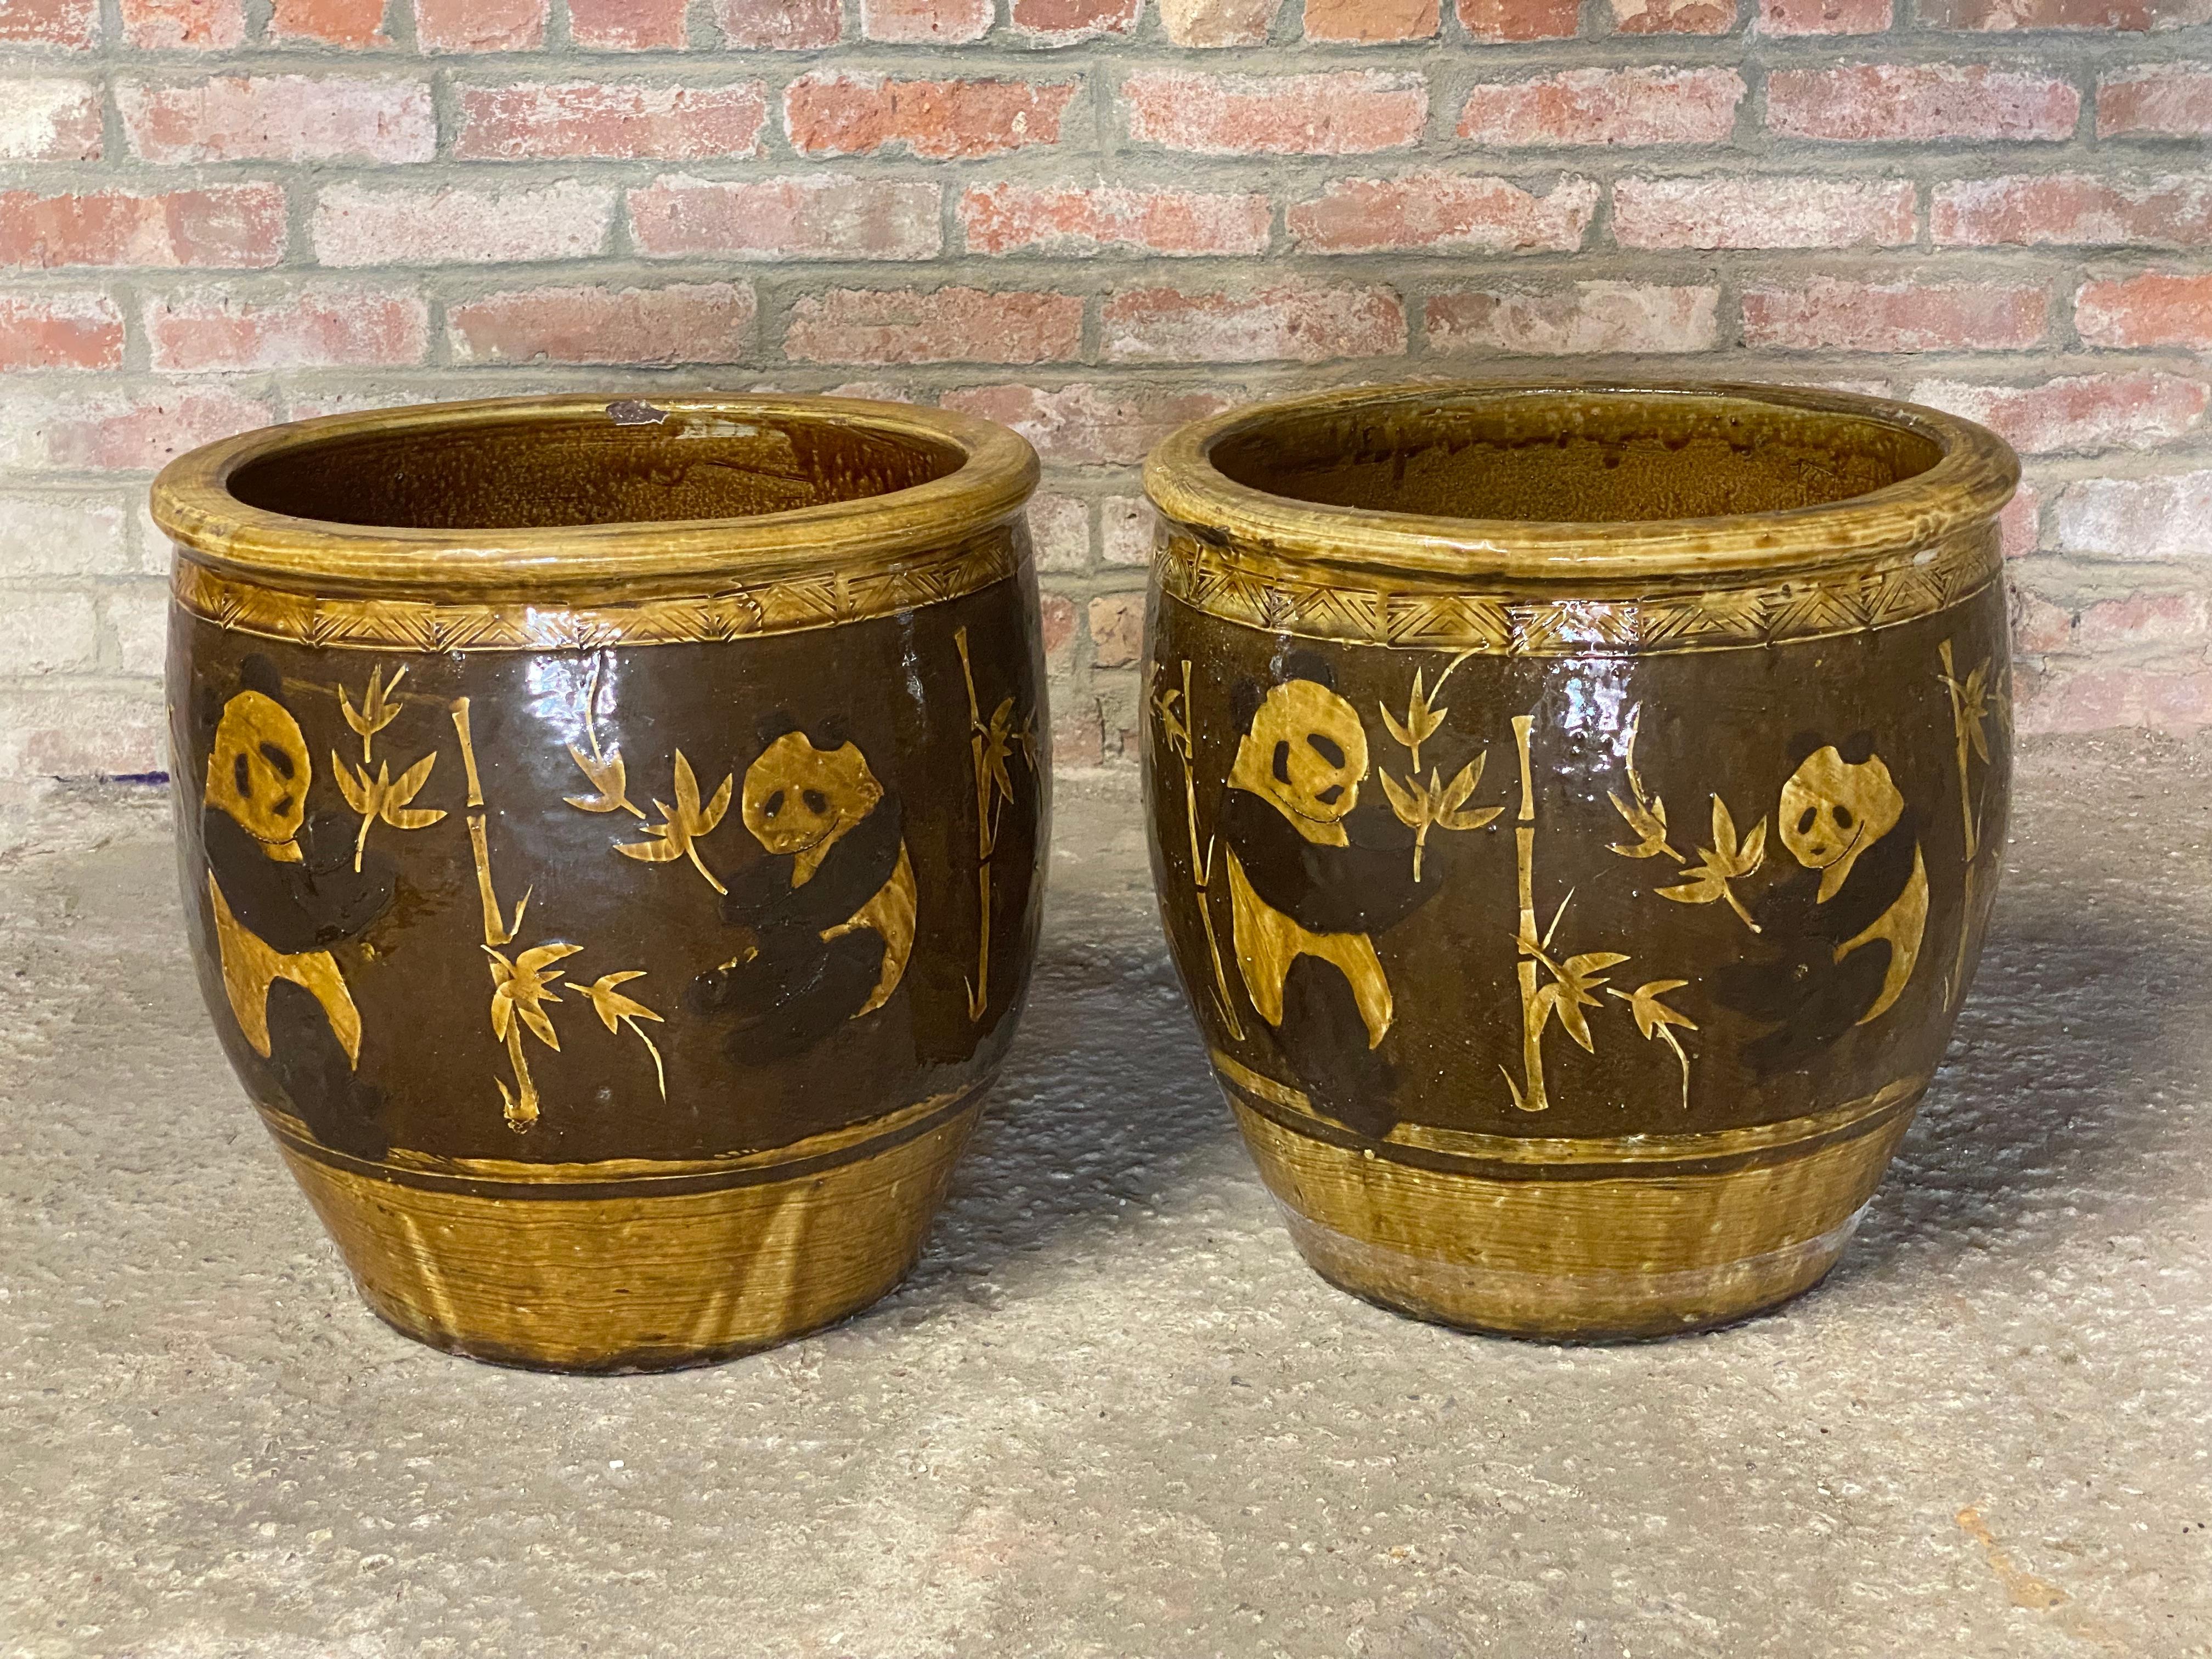 Ceramic Large Chinese Pottery Bamboo and Panda Decorated Planters, Pair